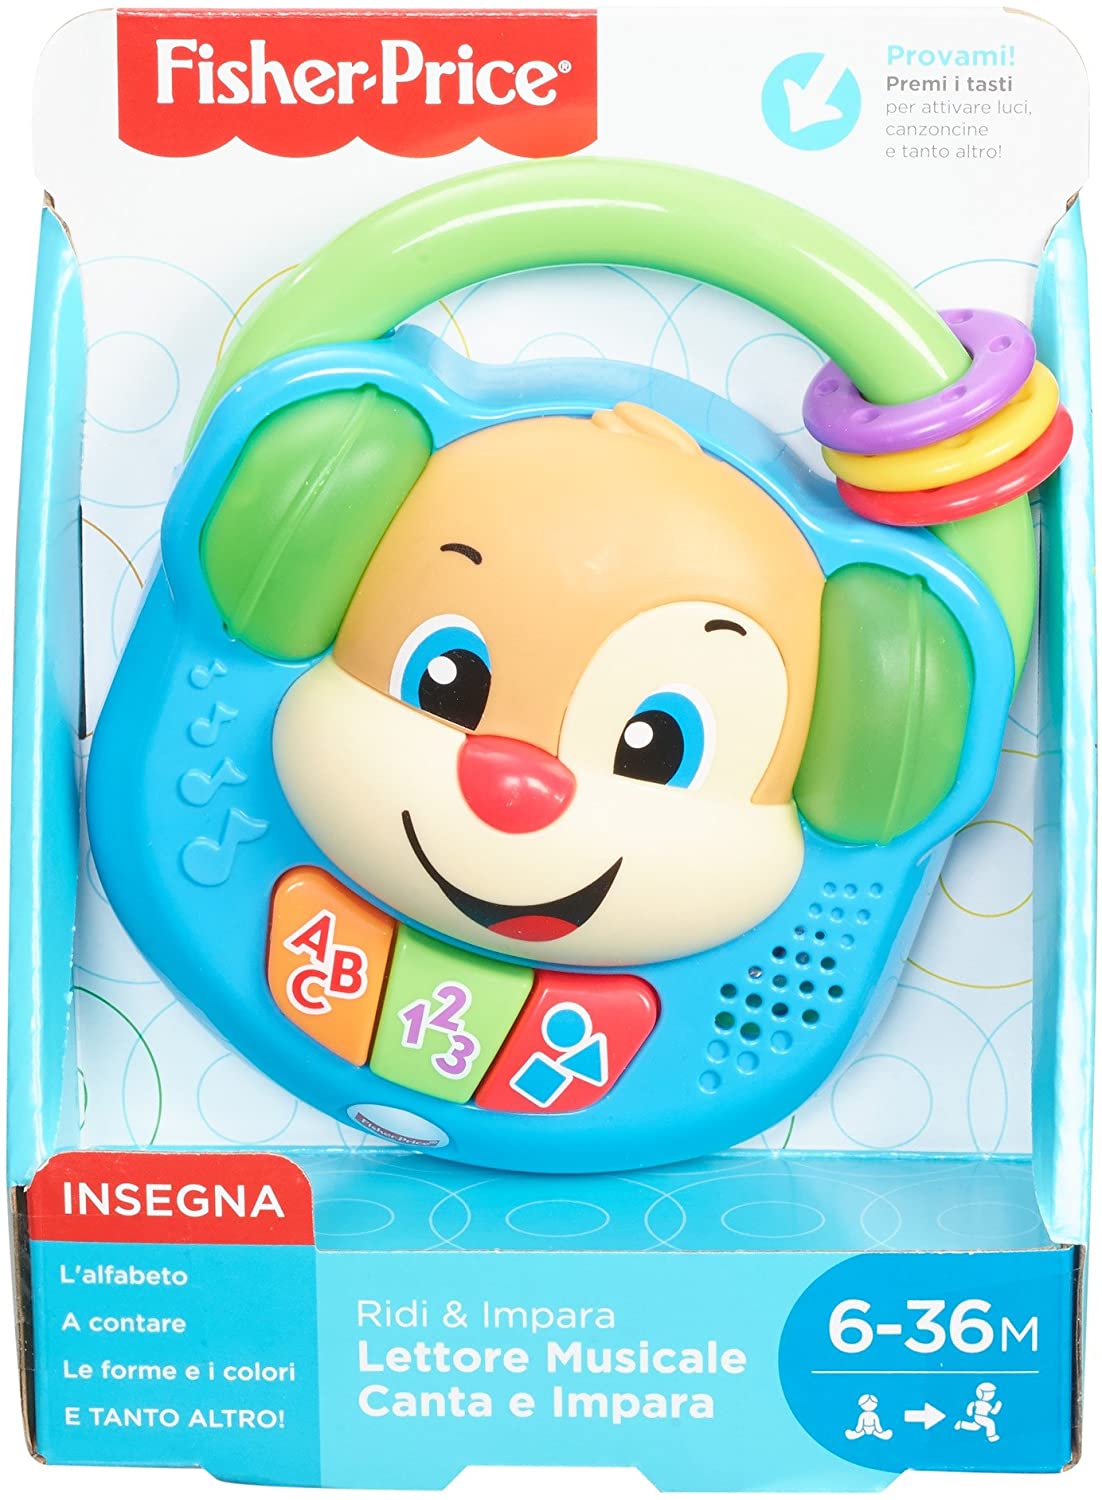 Fisher-Price FPV06 Music Player Singing and Learning Electronic Toy Ridi 6-36 Months 3